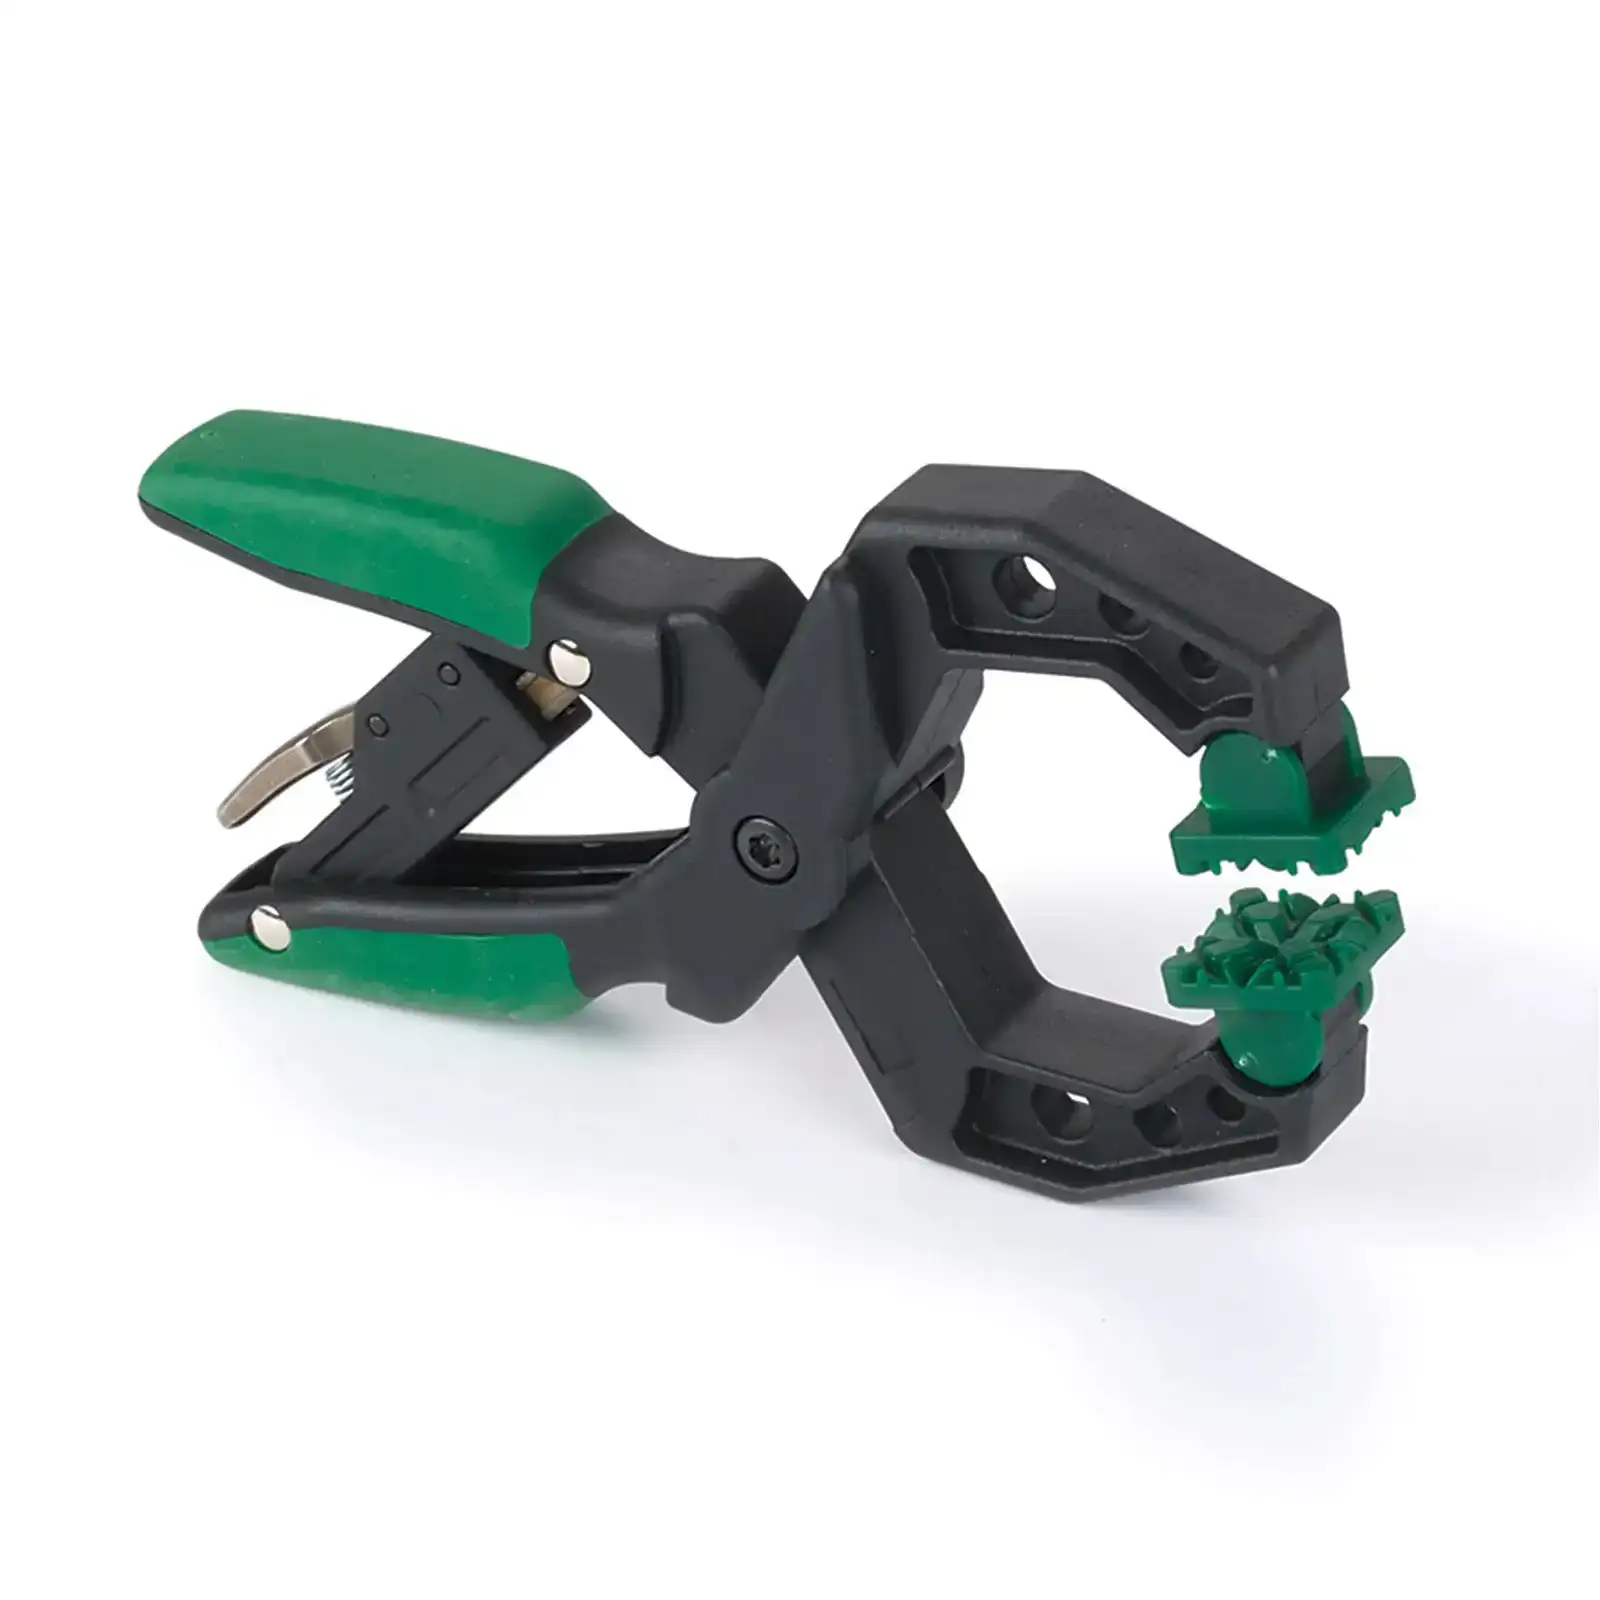 Save 40% - WoodRiver® Manual Power Clamps - 1-1/2", 2-1/4" and 4" Capacities